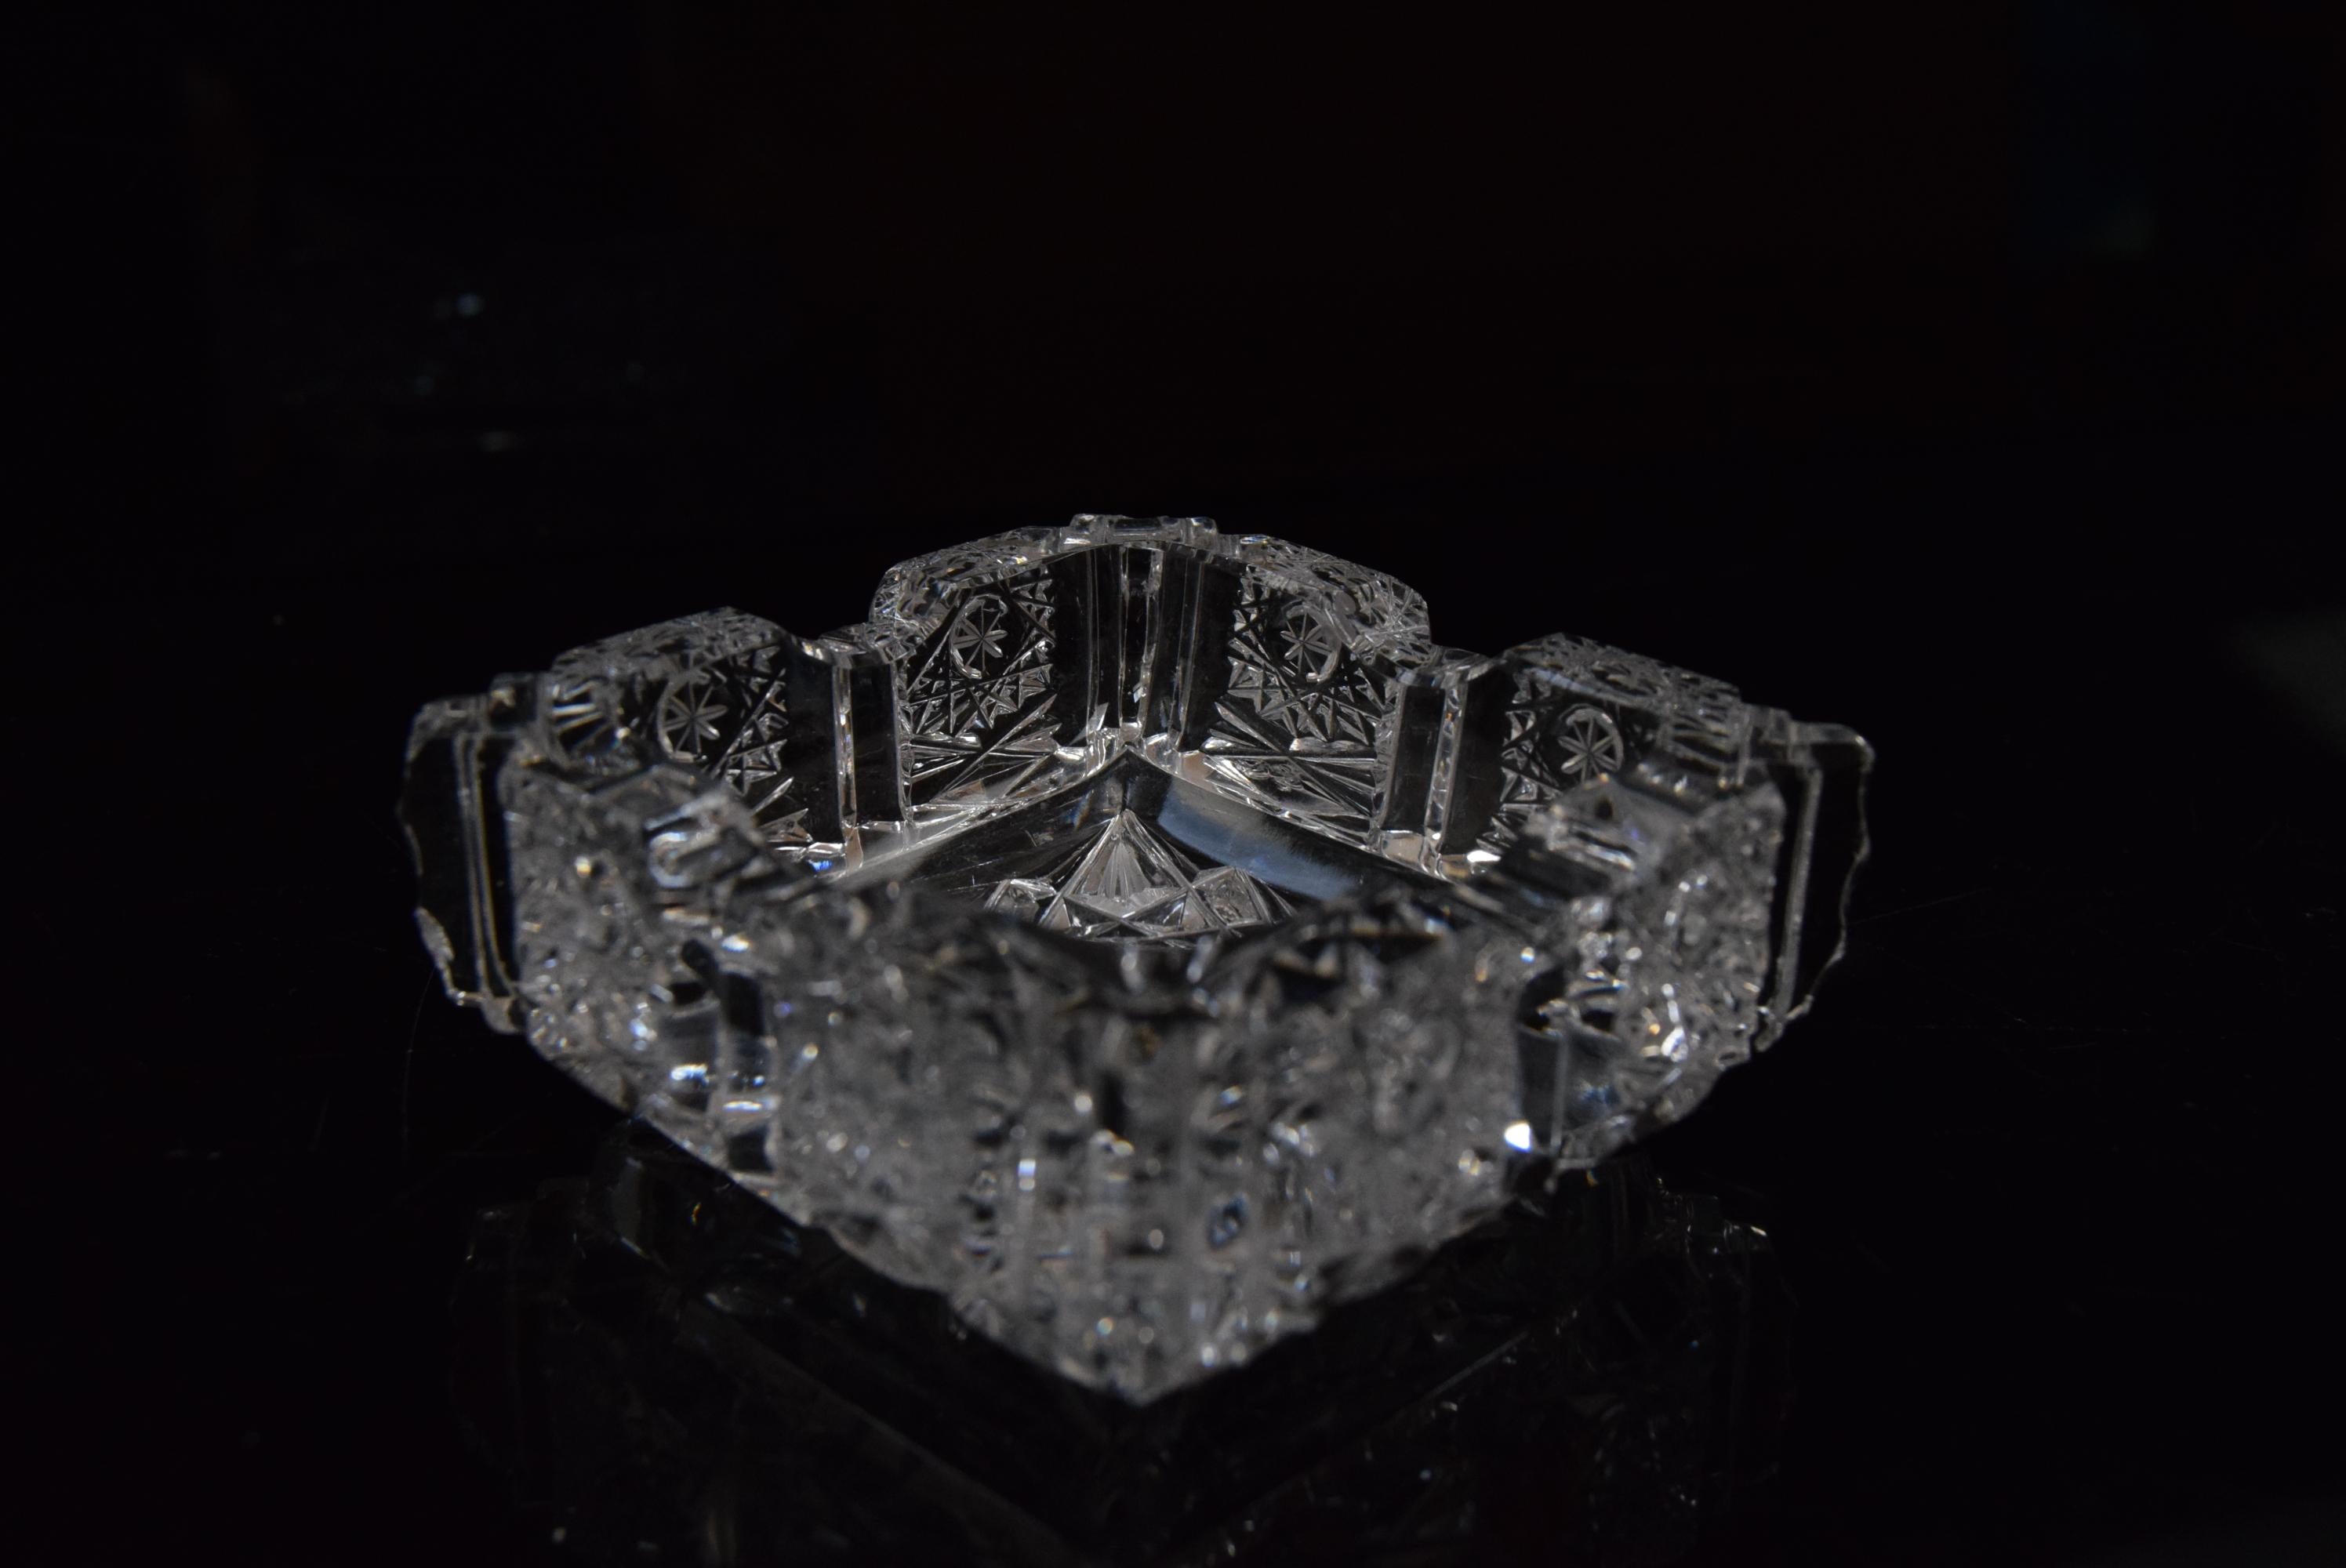 Pair of Rare Vintage Ashtrays, Cut Crystal Glass, Bohemia in the, 1960s For Sale 9